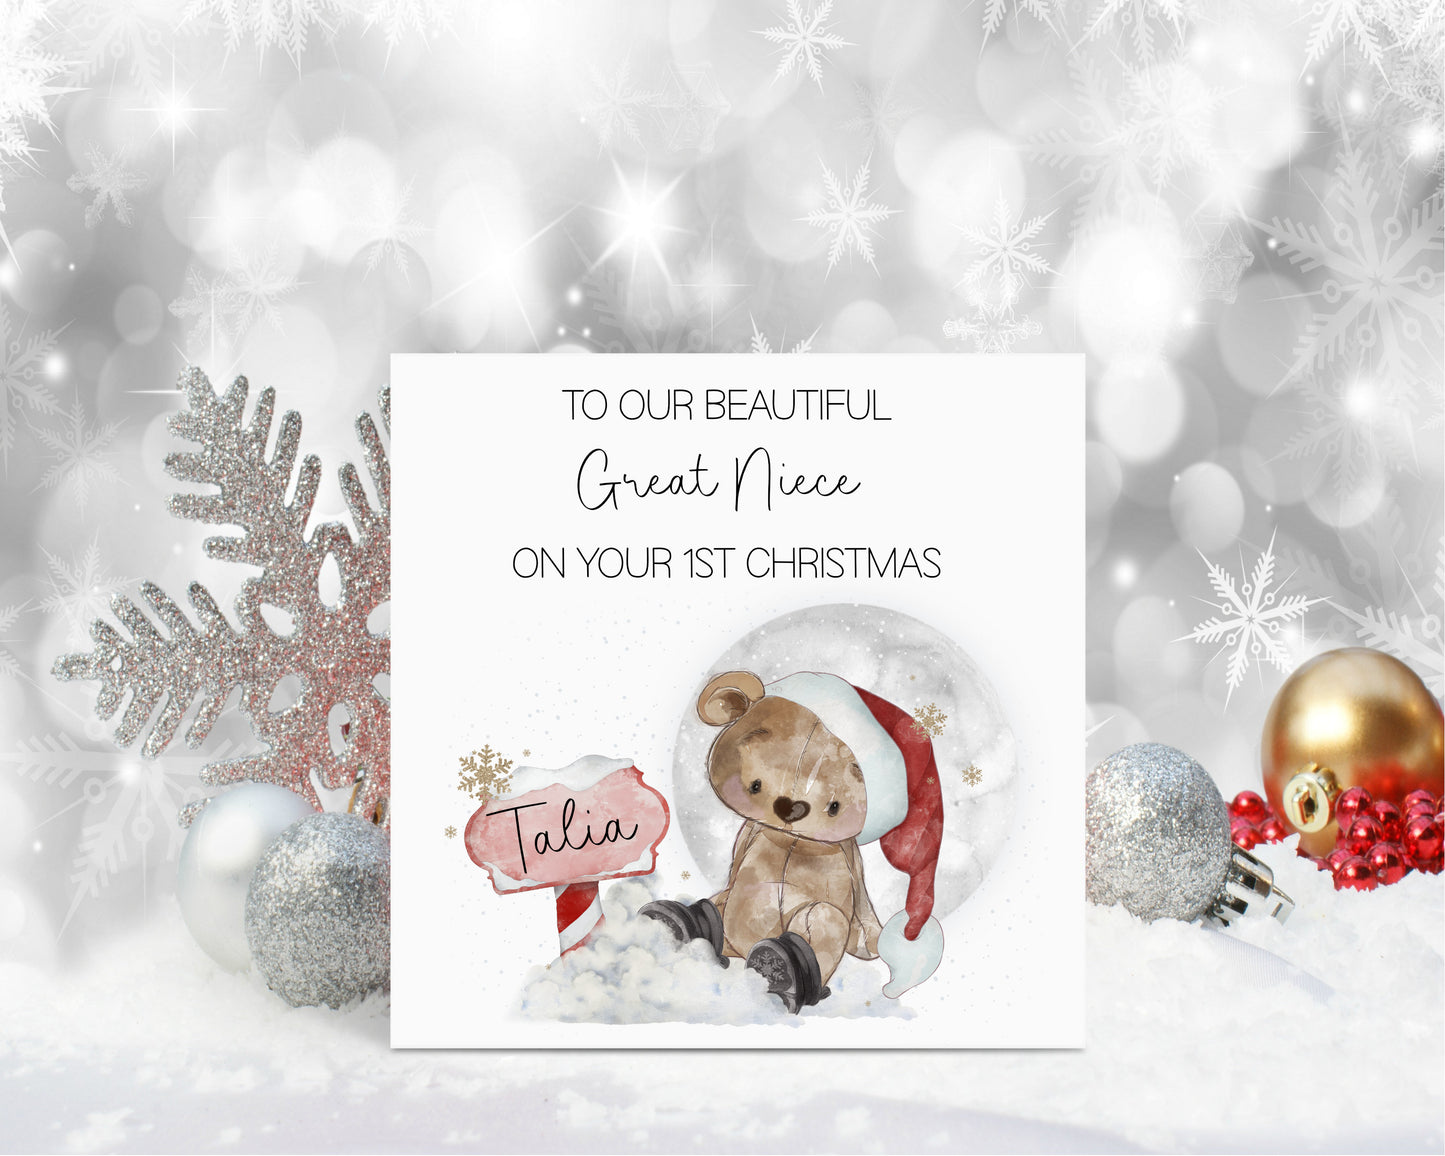 Goddaughter 1st Christmas Card, Christmas Card For Goddaughter, Baby's 1st Xmas Card, Personalised Christmas Card, Christmas In July